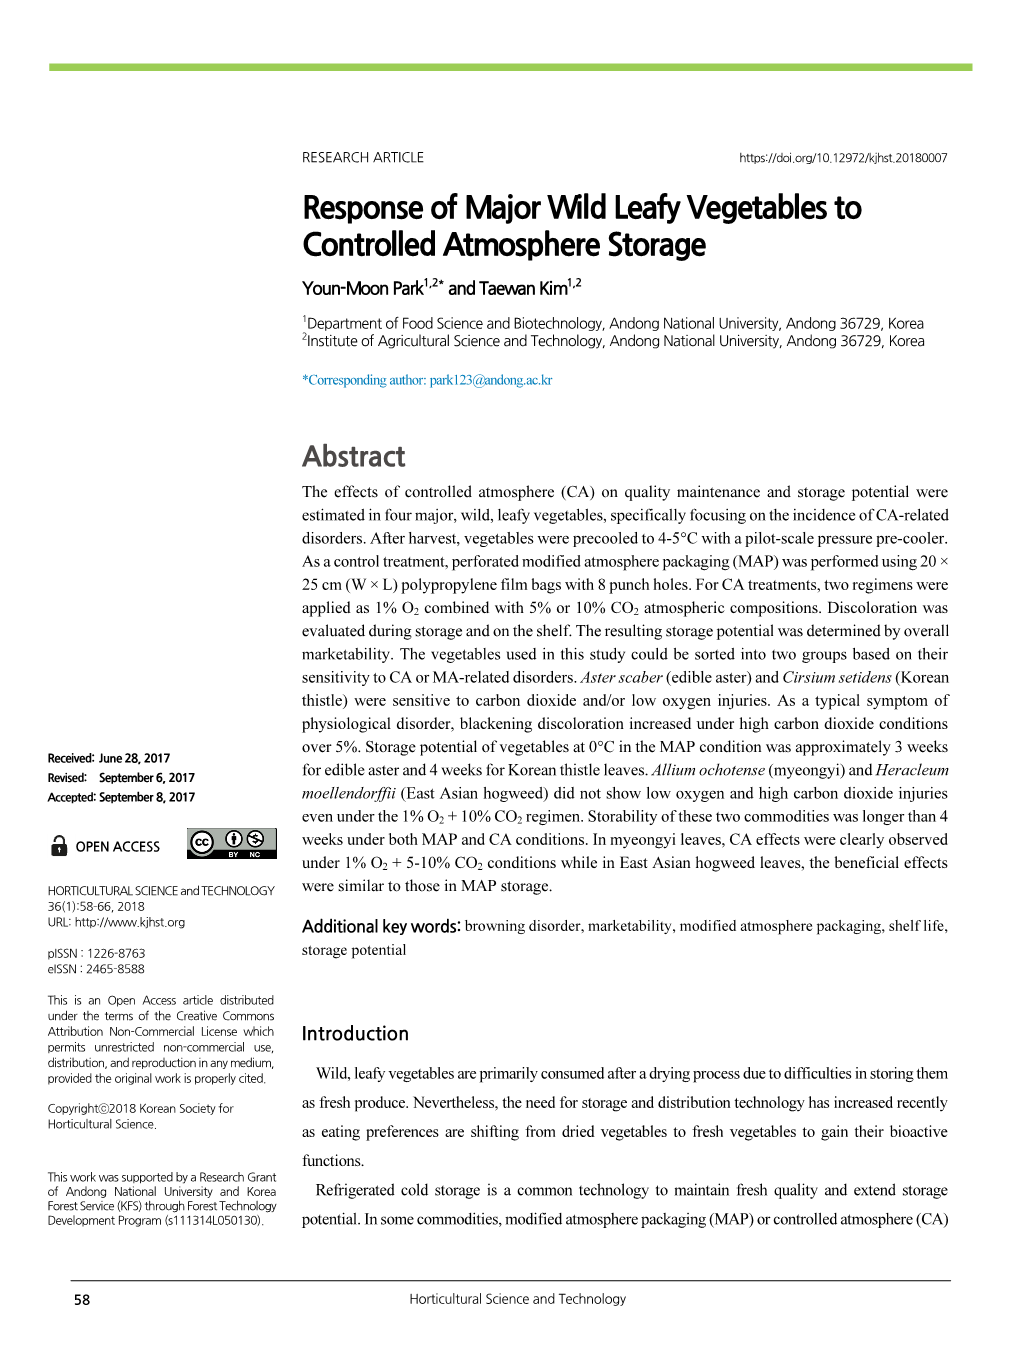 Response of Major Wild Leafy Vegetables to Controlled Atmosphere Storage